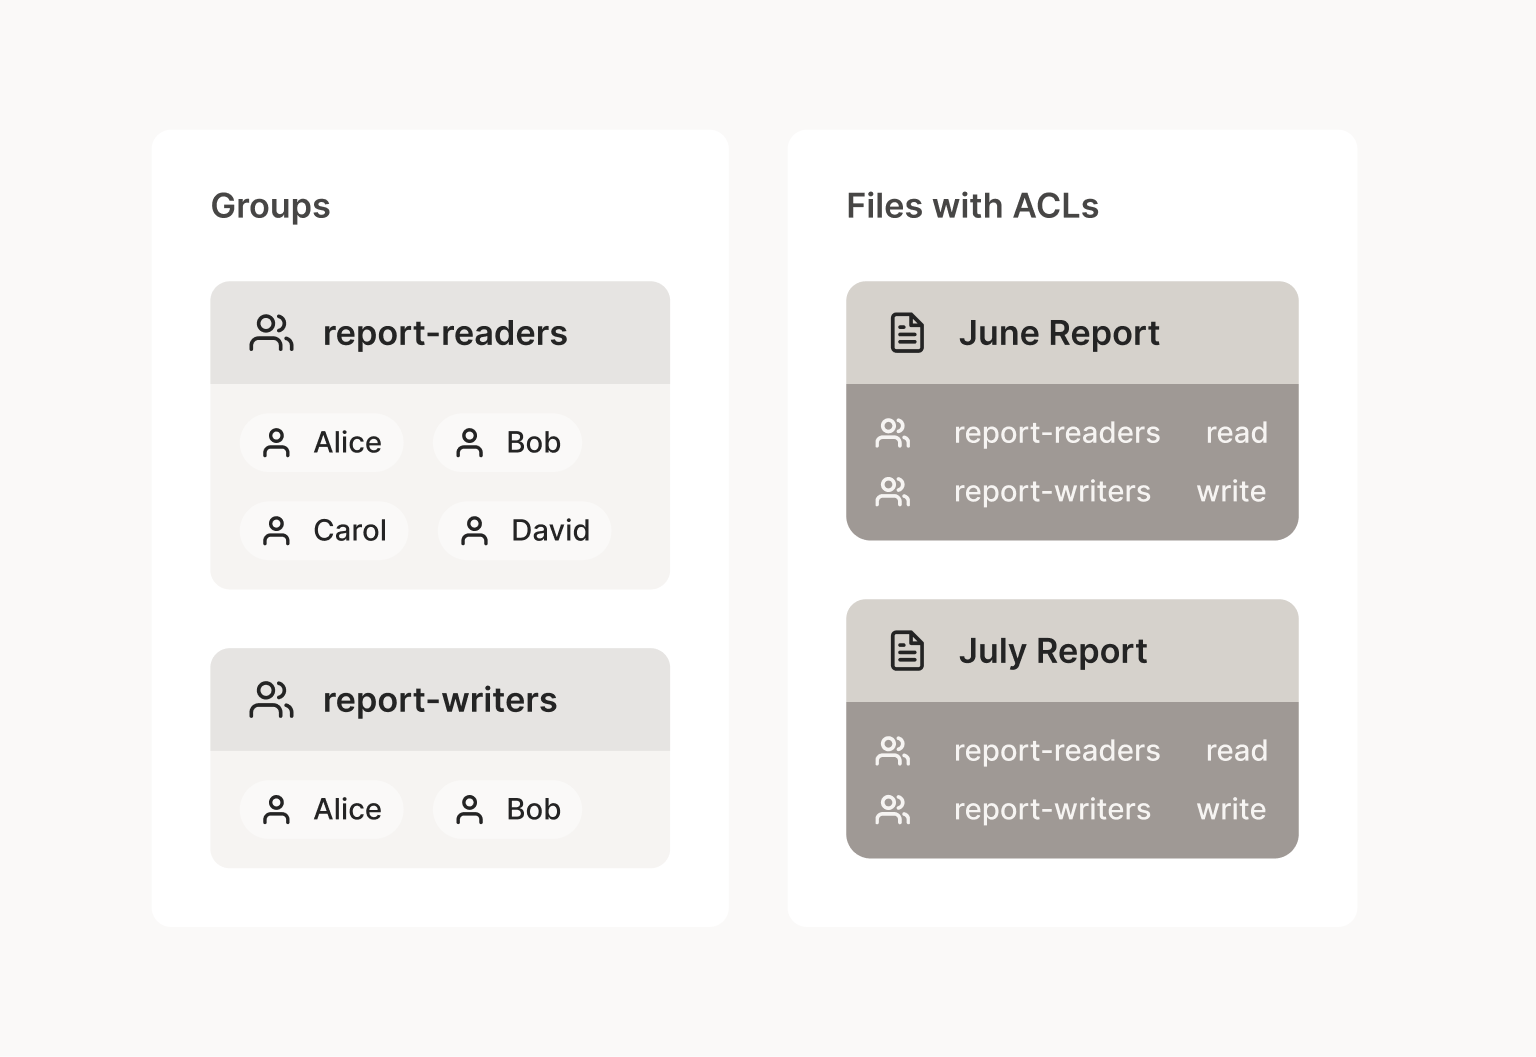 A diagram showing two groups called report-writers and report-readers, each containing several users. These groups are then used to set permissions on June and July reports which allow members of the report-writers group to write and the report-readers group to read these report files.